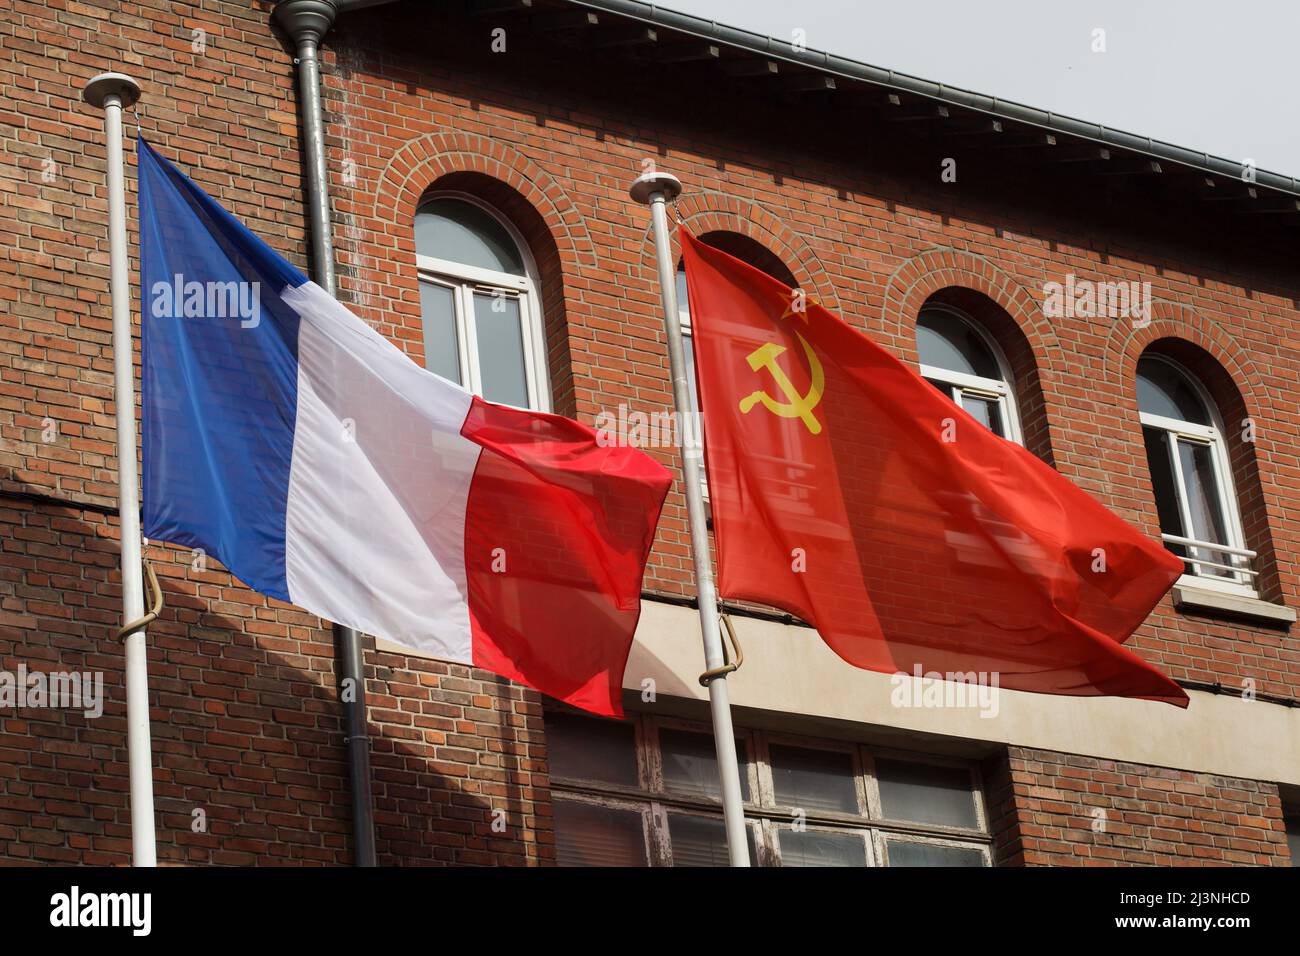 National flags of France and the Soviet Union wave at the entrance to the Museum of the Surrender (Musée de la Reddition) in Reims, France. The first German Instrument of Surrender that ended World War II in Europe was signed in this building at 02:41 Central European Time (CET) on 7 May 1945. Stock Photo